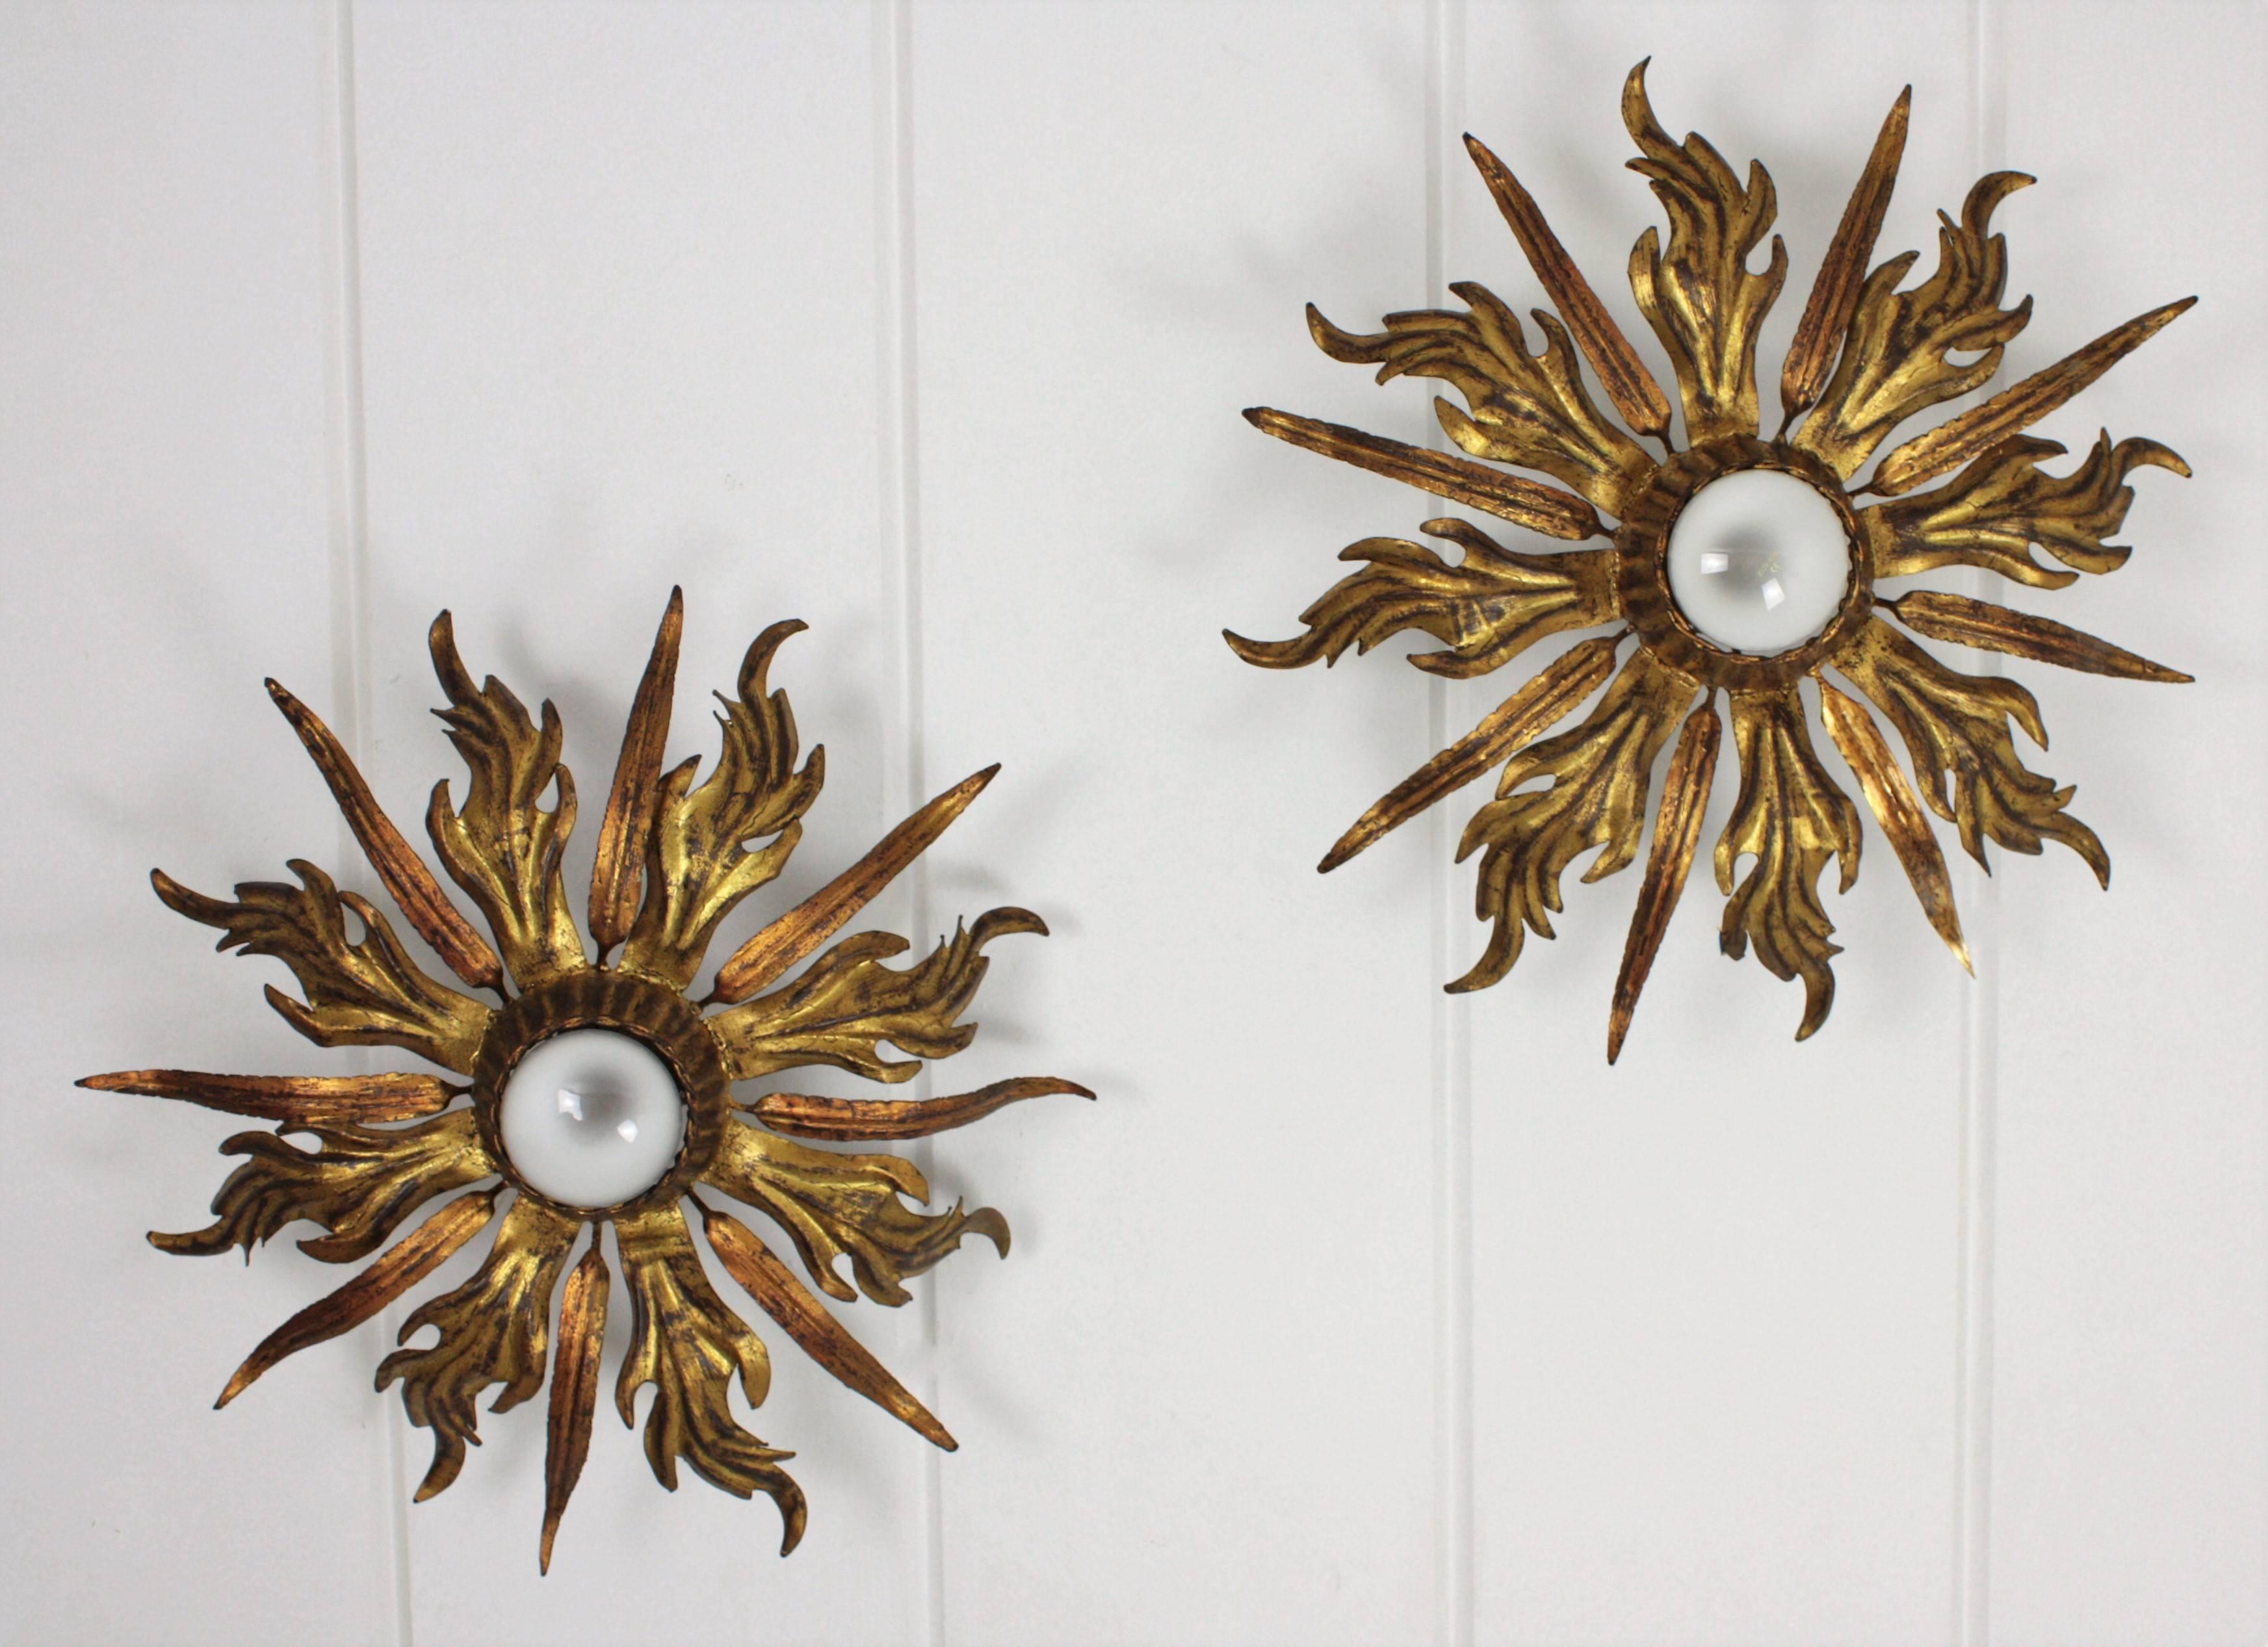 Hollywood Regency French 1930s Pair of Leafed Copper & Gilt Iron Sunburst Ceiling or Wall Sconces